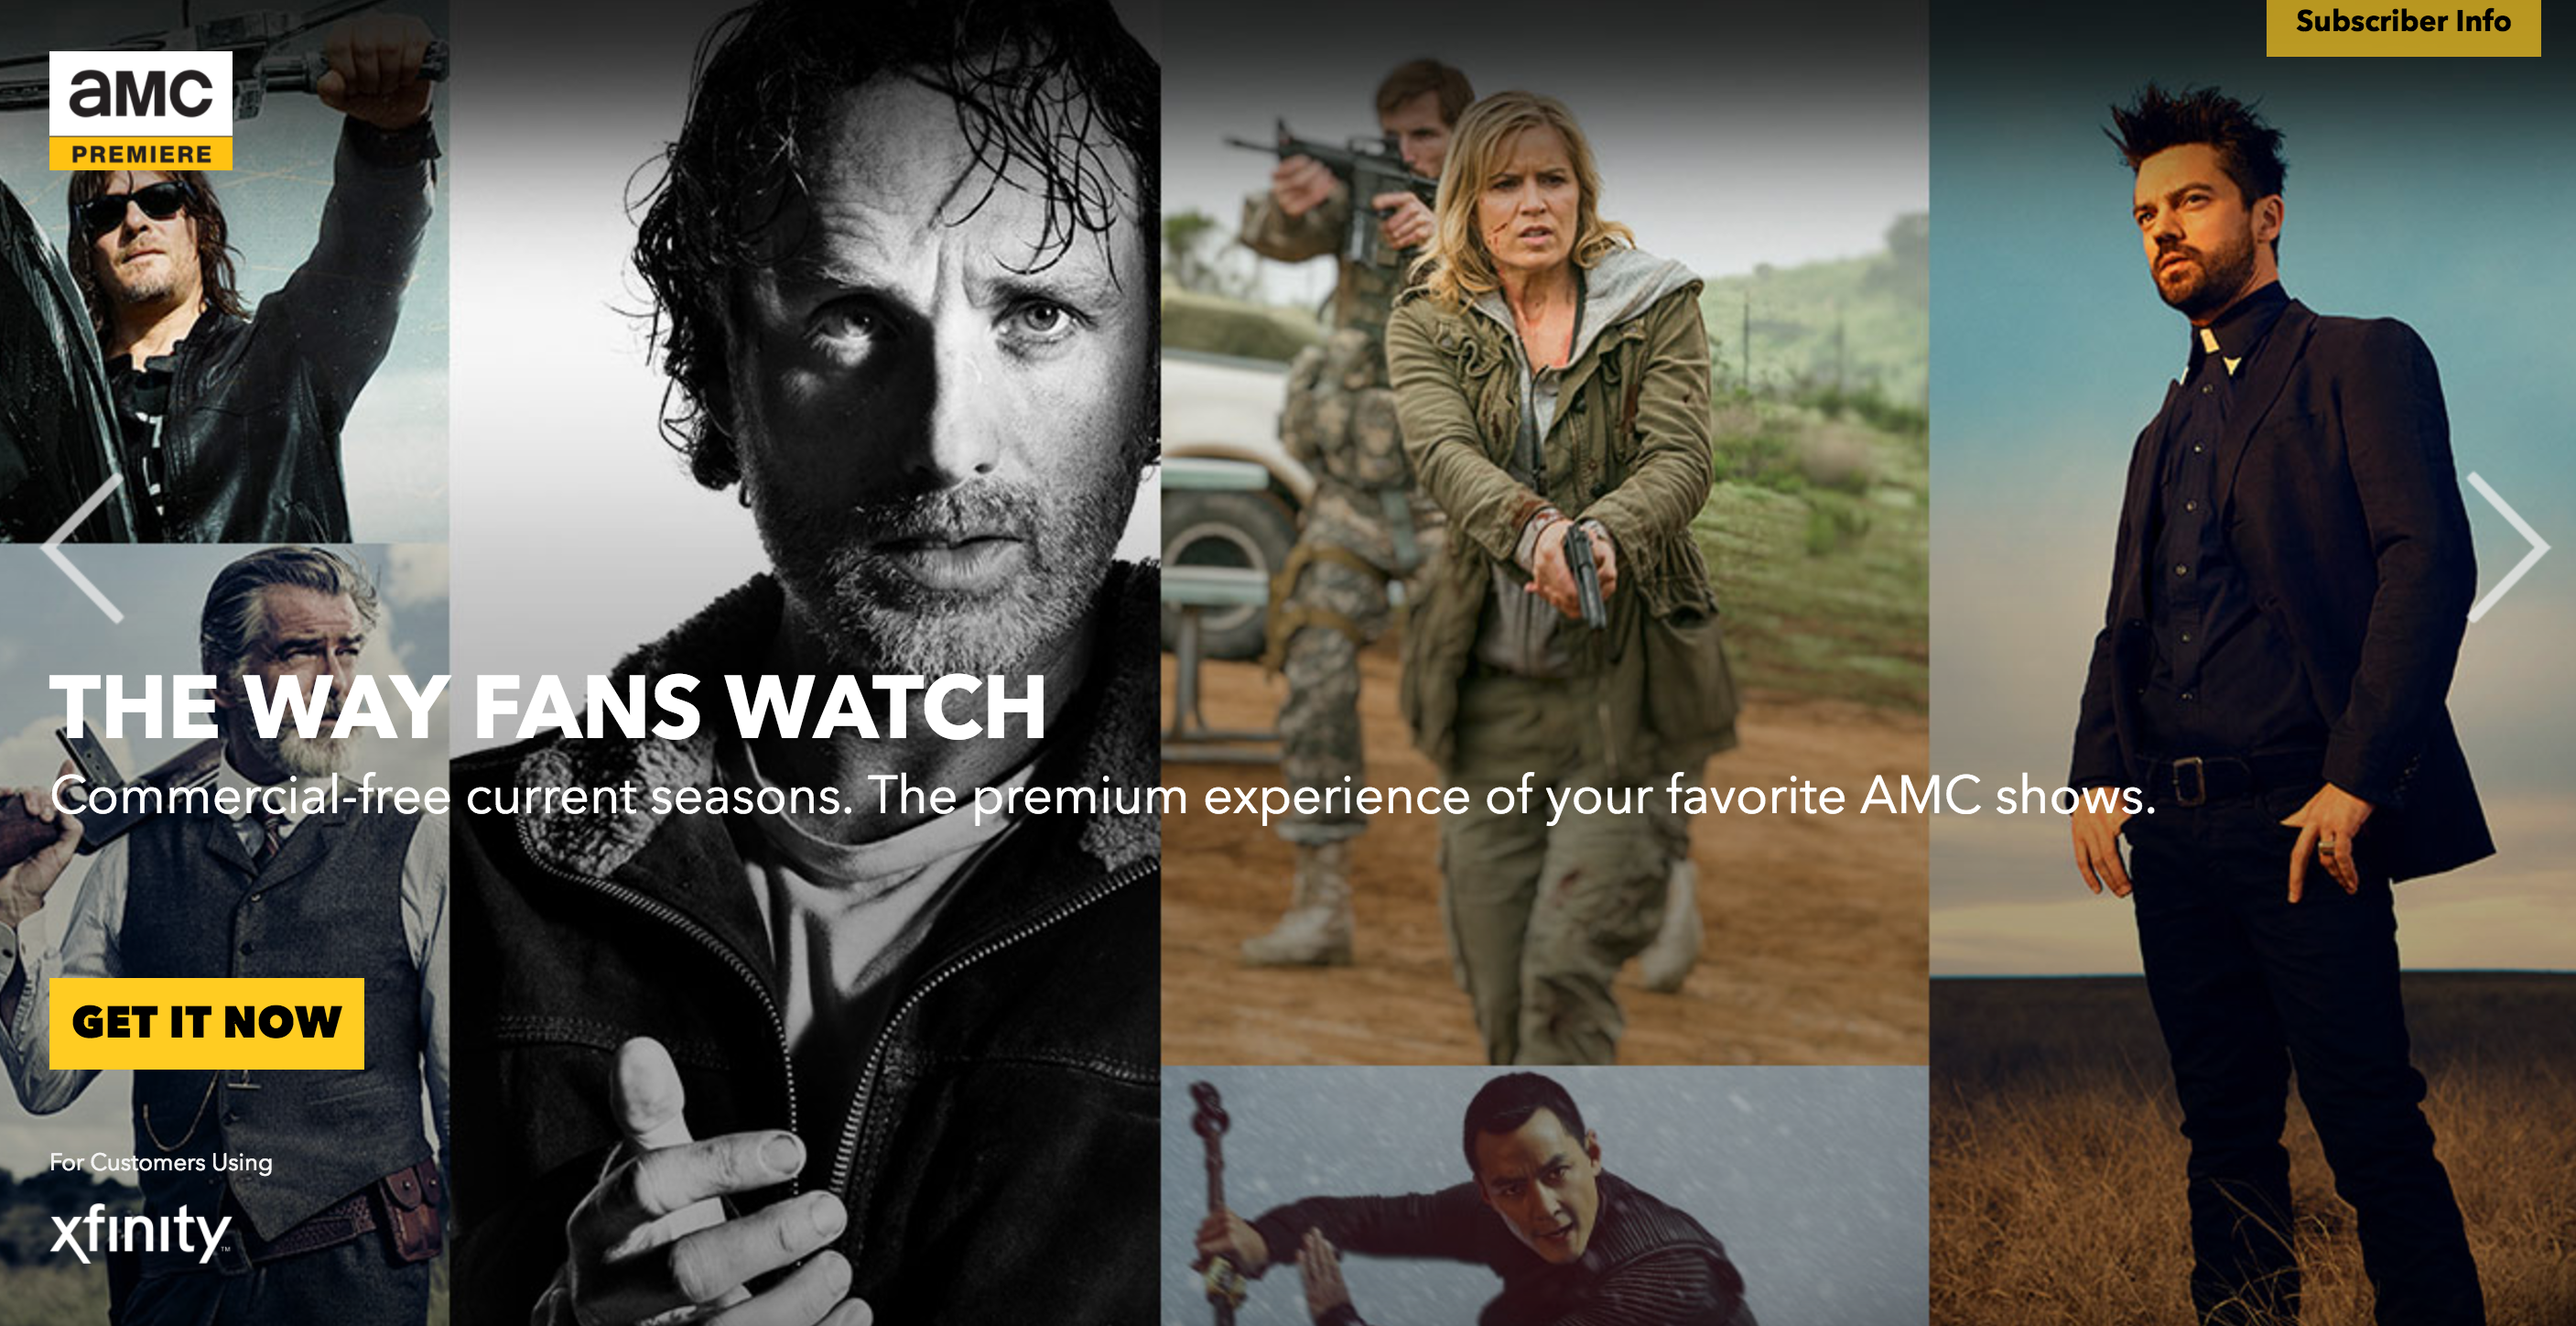 AMC launches a $5 per month ad-free TV 